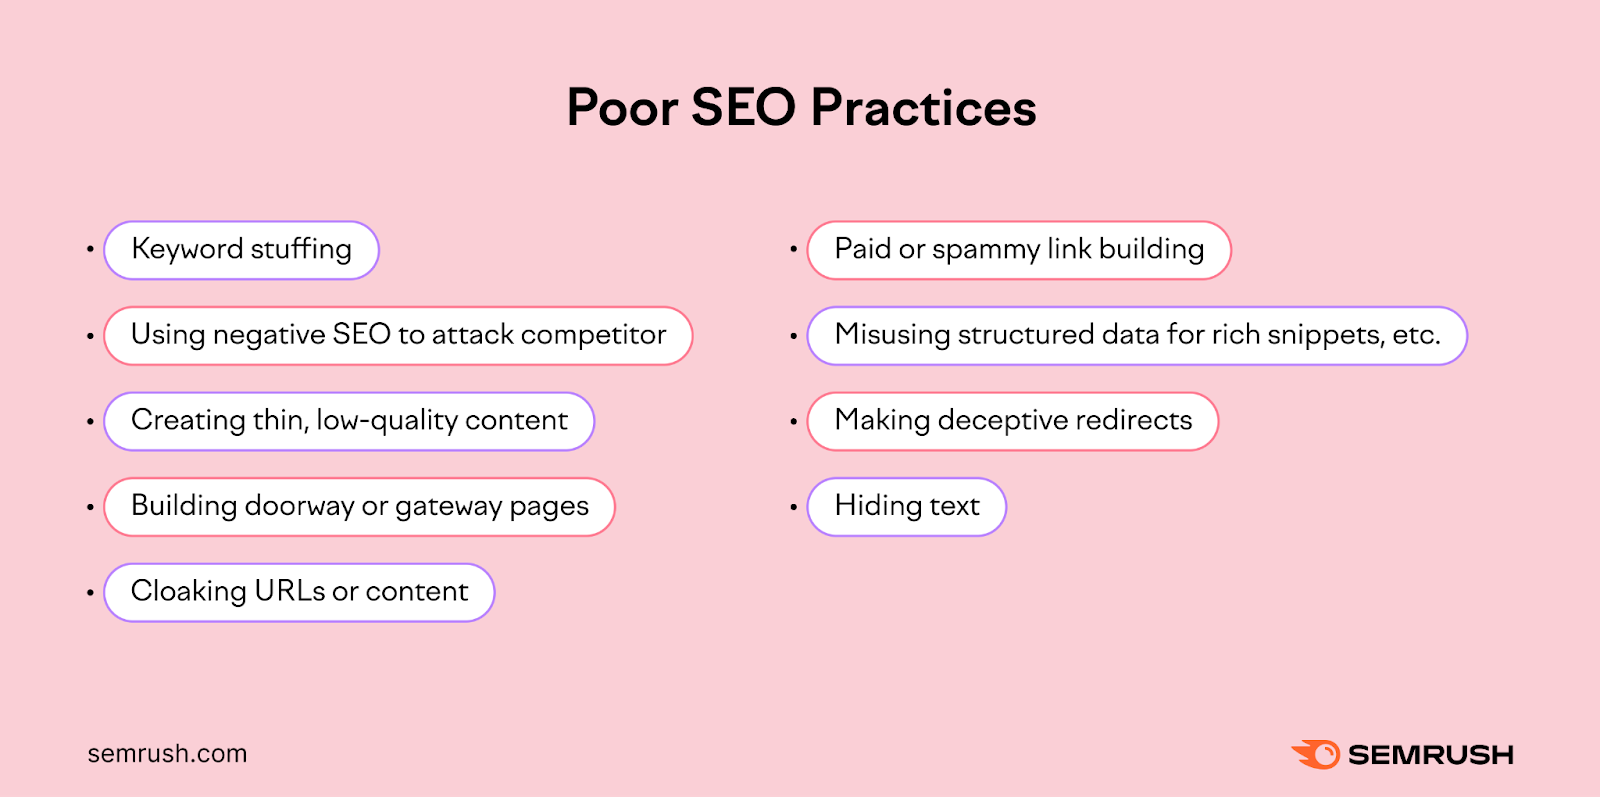 An infographic by Semrush listing poor SEO practices